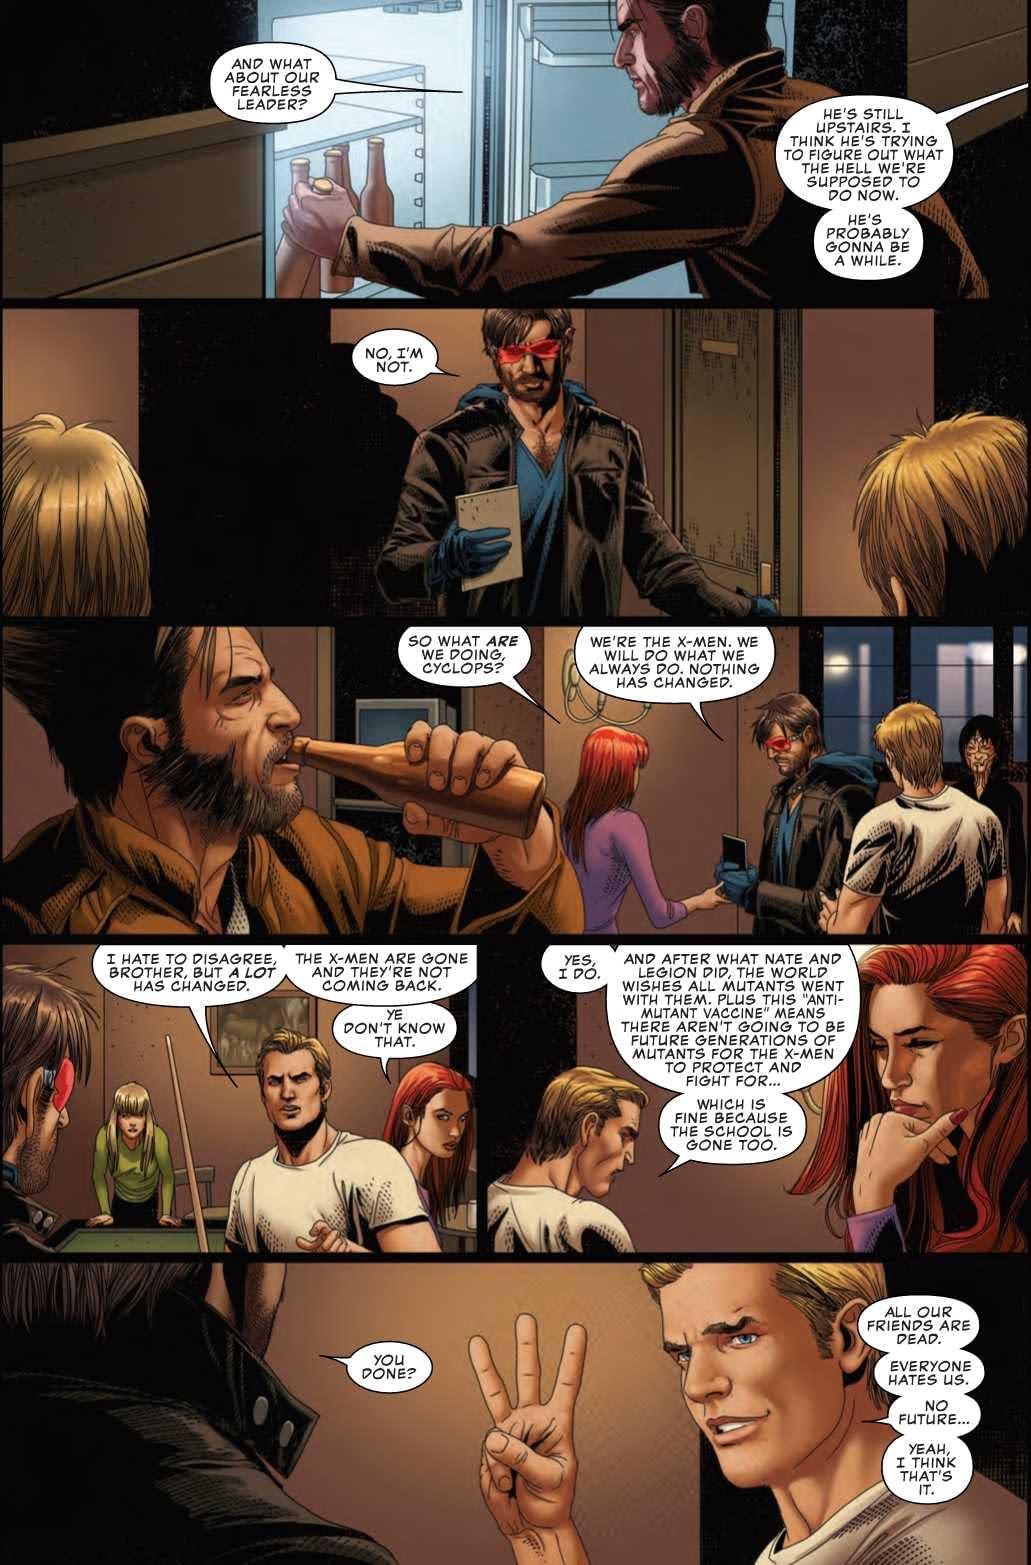 Wolverine Proves He's the Worst There Is in Next Week's Uncanny X-Men #13